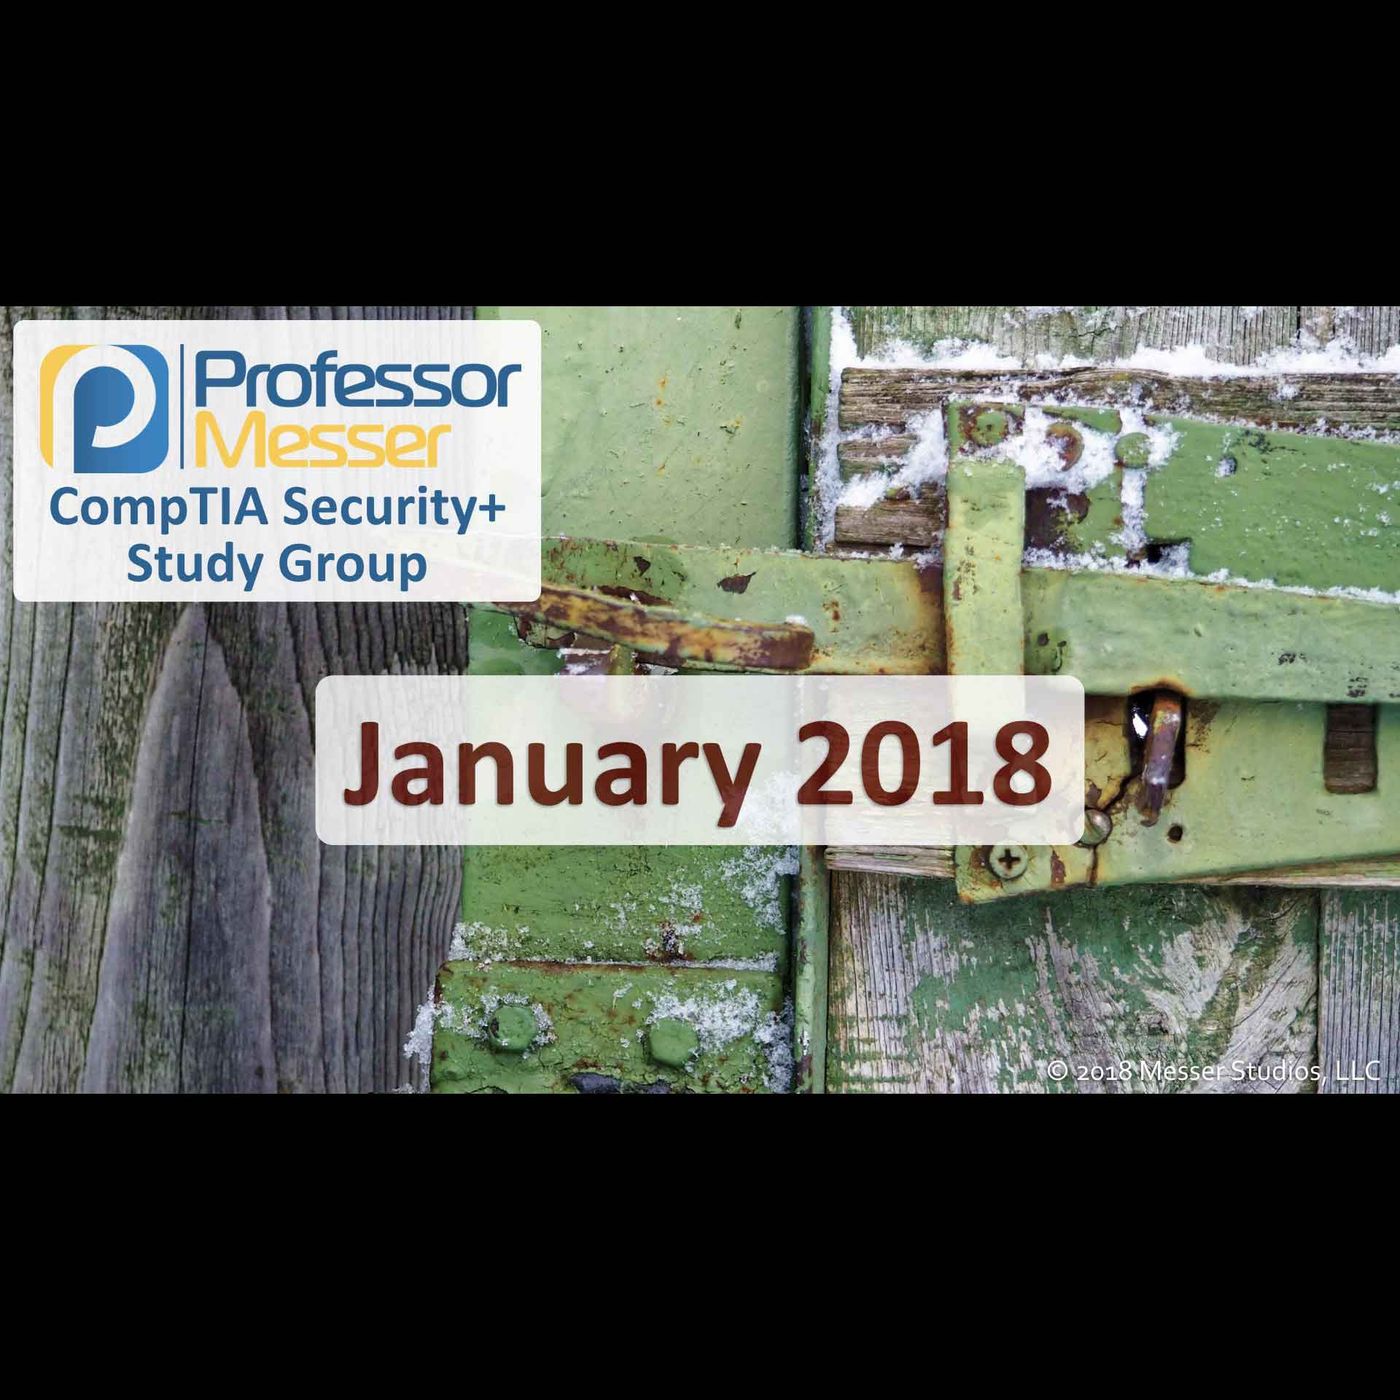 Professor Messer's Security+ Study Group - January 2018